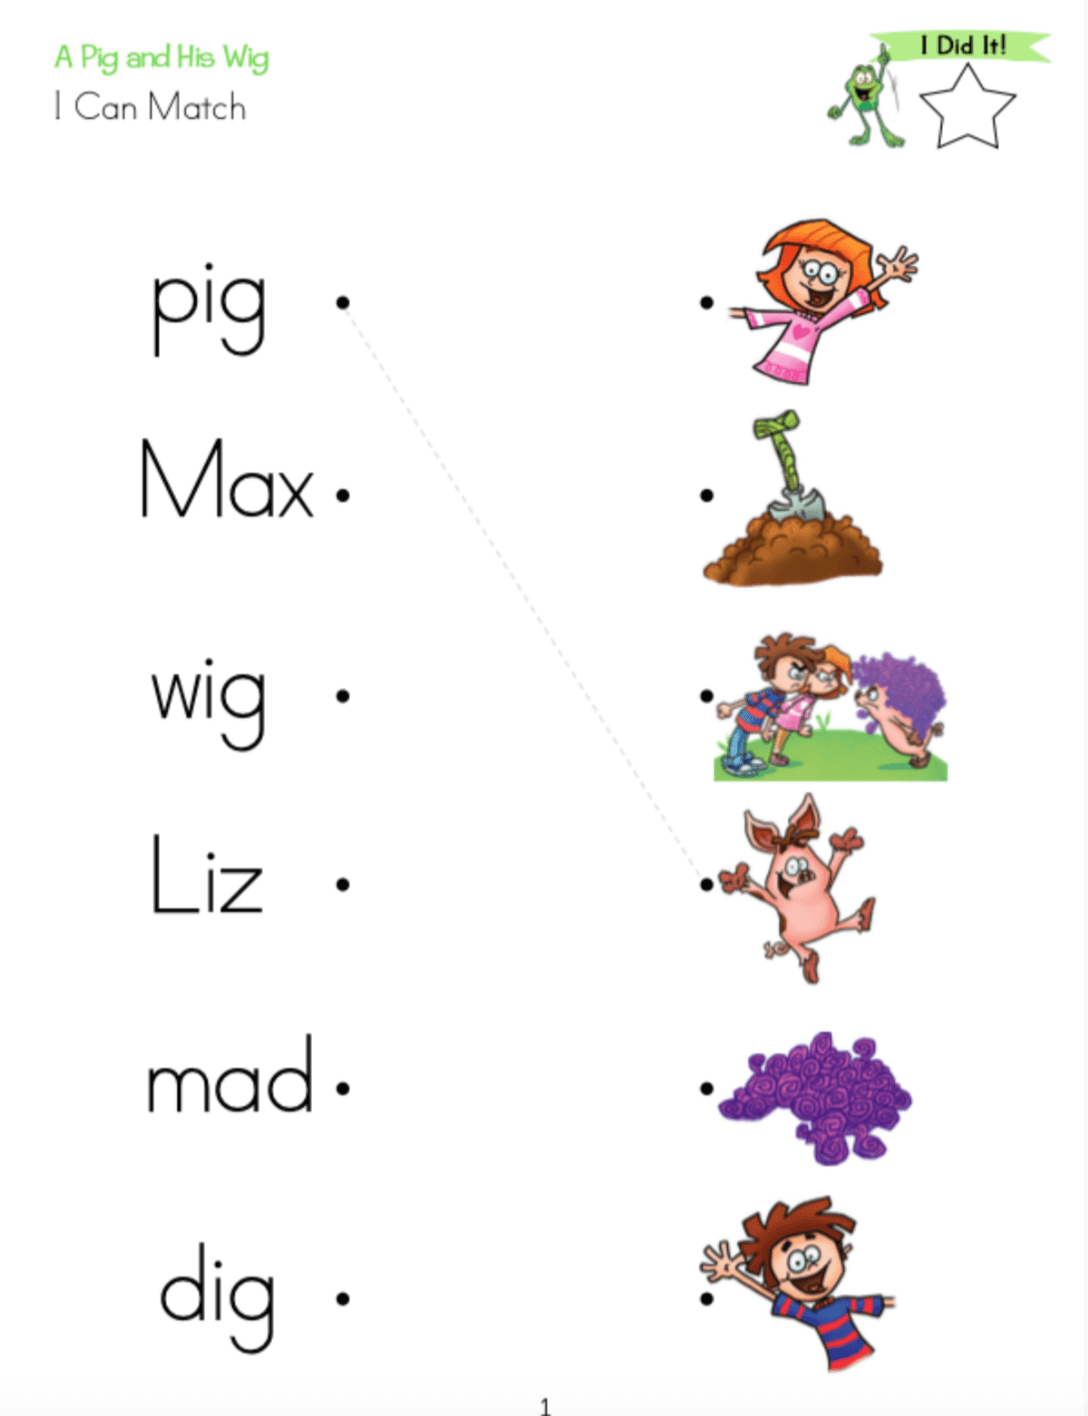 Whole Phonics A Pig and His Wig I can Match image